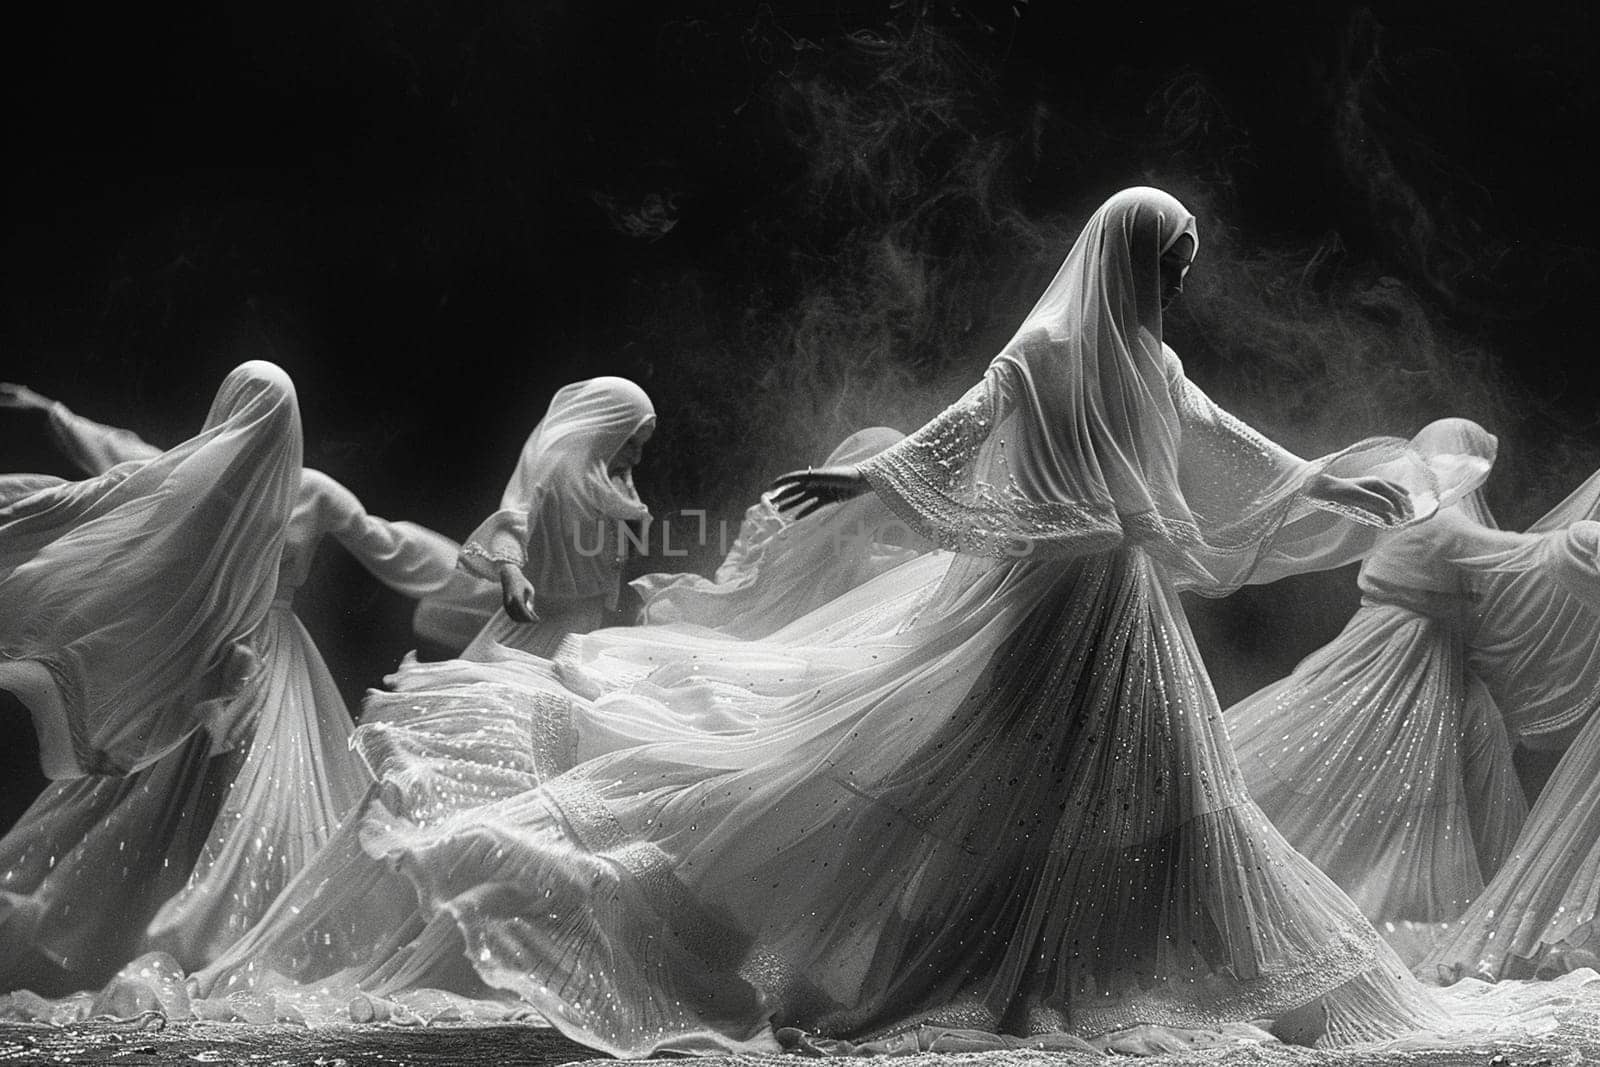 Sufi Whirling Dervish Skirts in Gentle Rotation, The skirts' motion blurs, capturing the spiritual ecstasy and devotion of the dance.